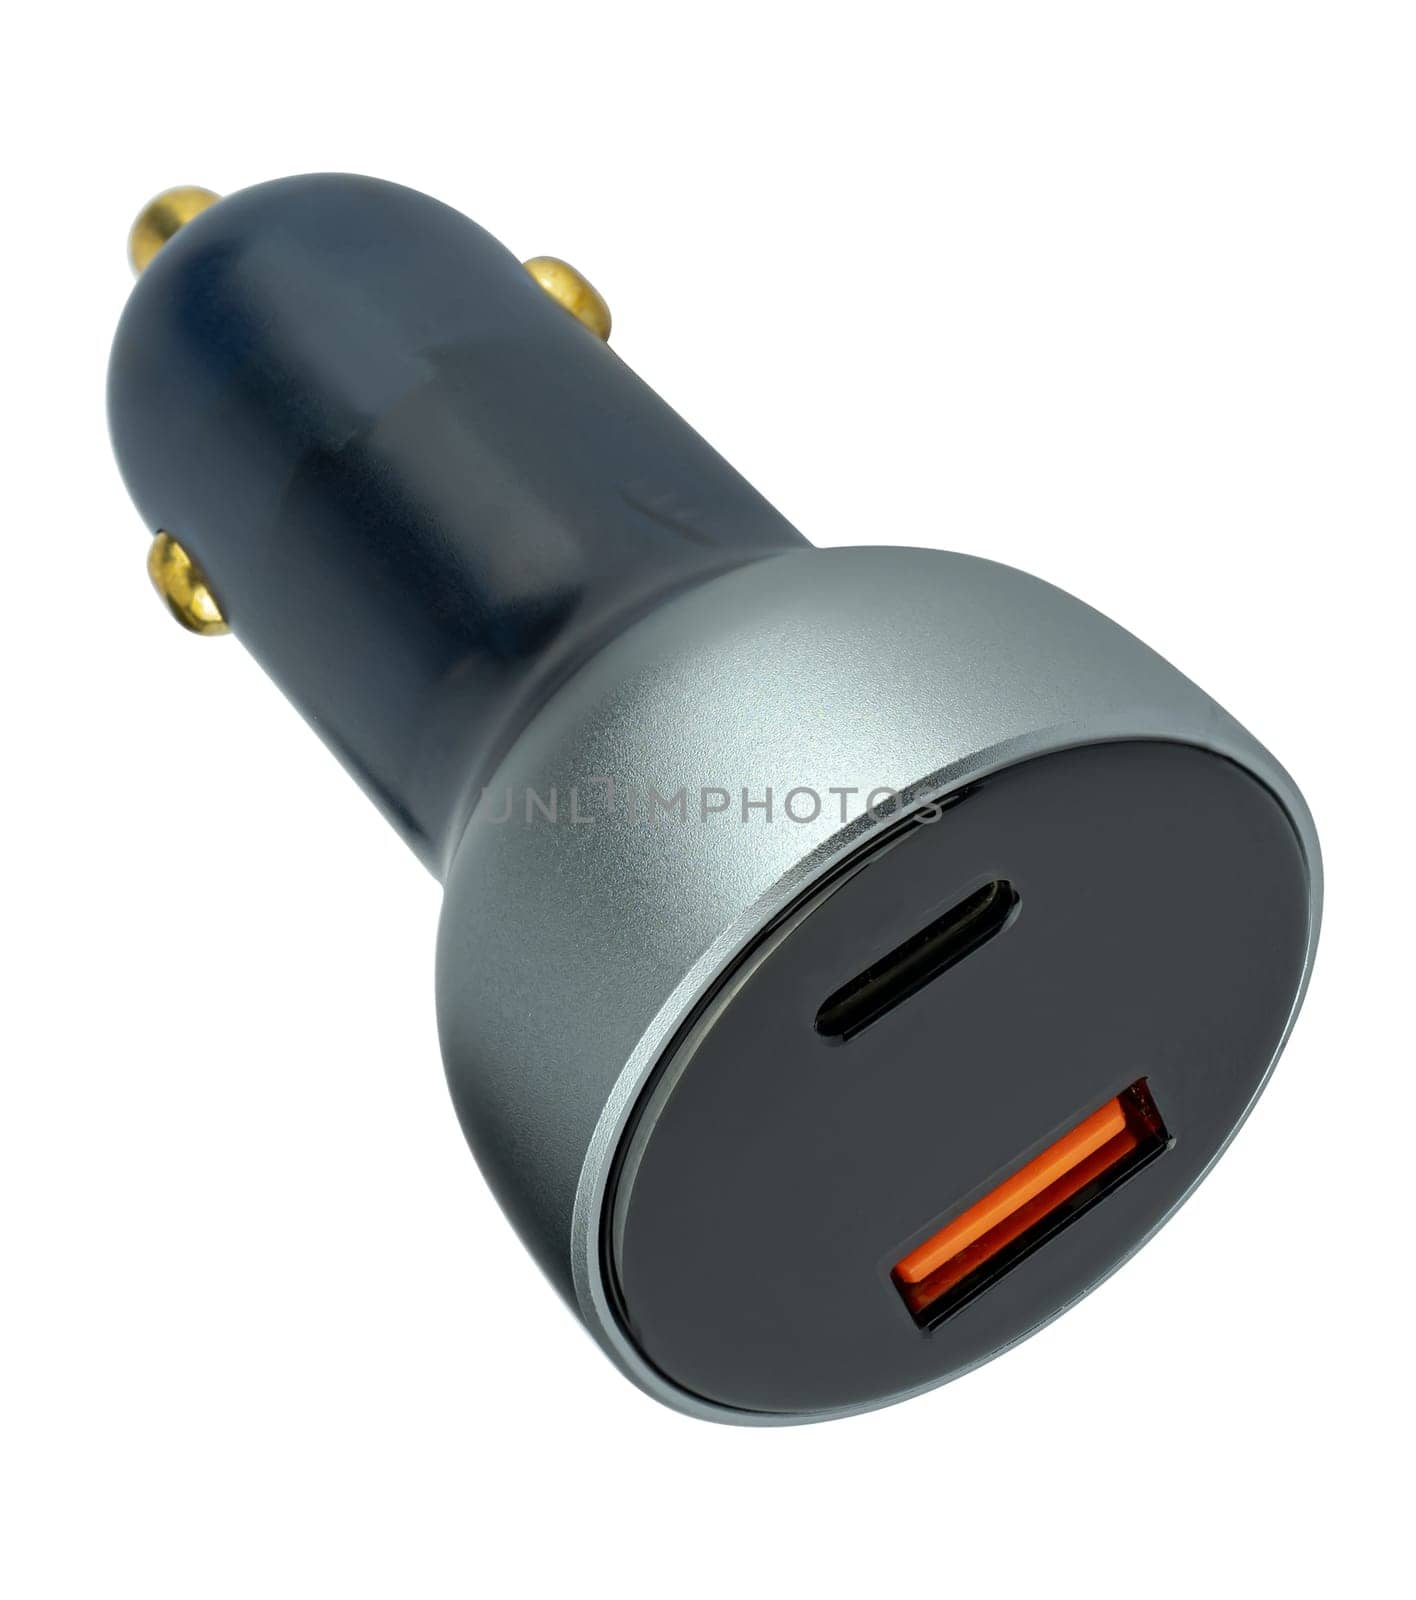 Car cigarette lighter power adapter, for tablet phone on white background in insulation